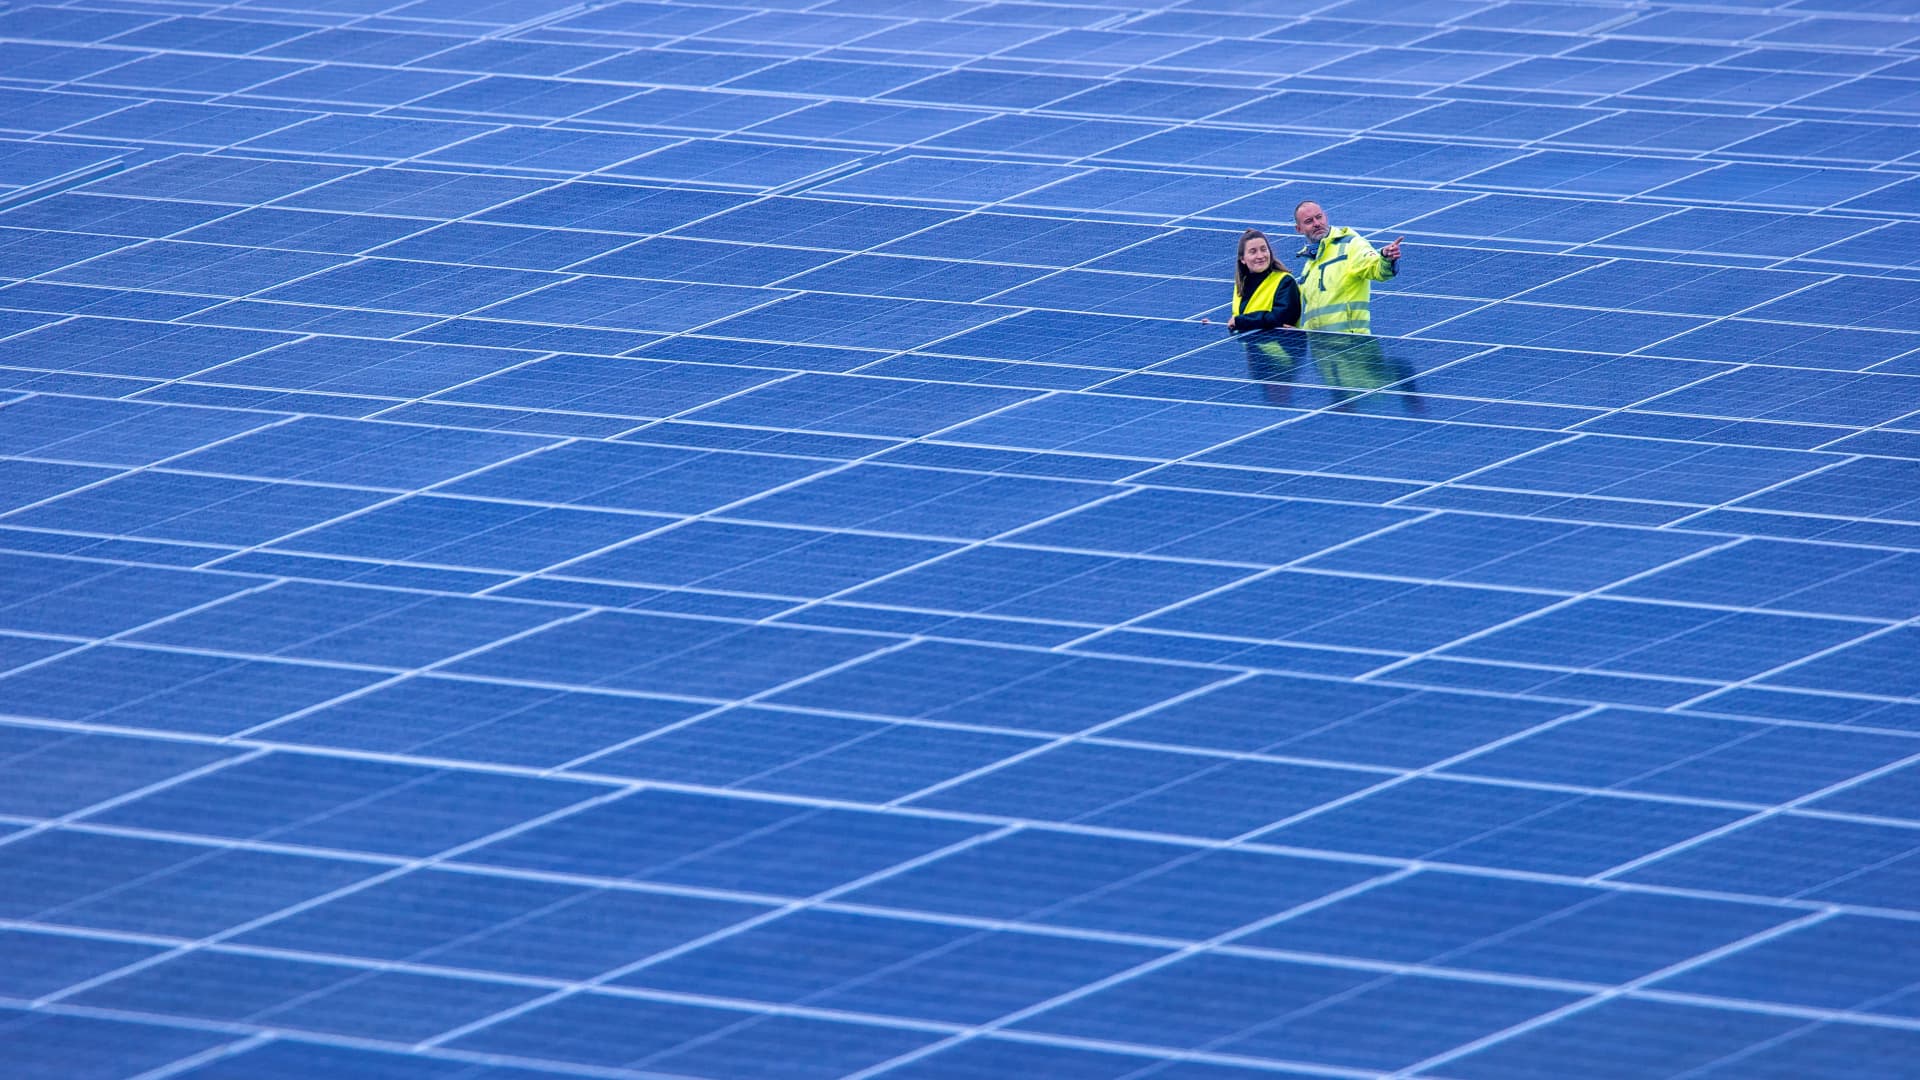 Employees of the company Goldbecksolar are testing a module in a solar park under construction in a former gravel opencast mine.